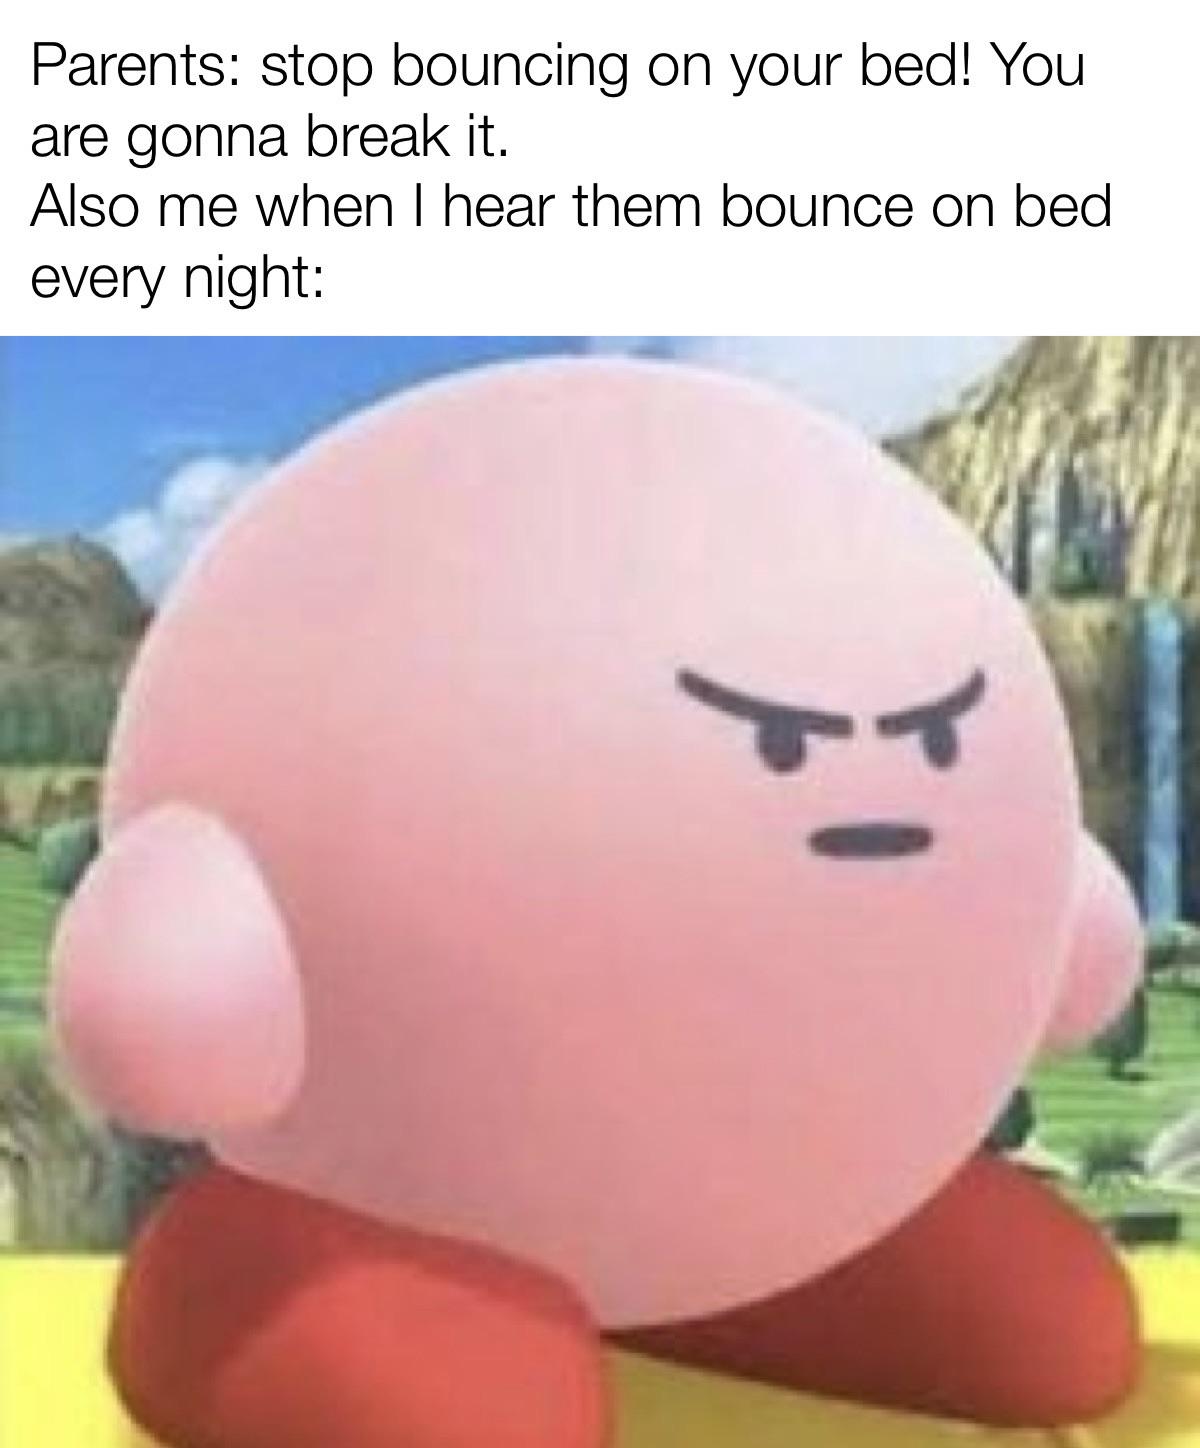 angry kirby - Parents stop bouncing on your bed! You are gonna break it. Also me when I hear them bounce on bed every night de